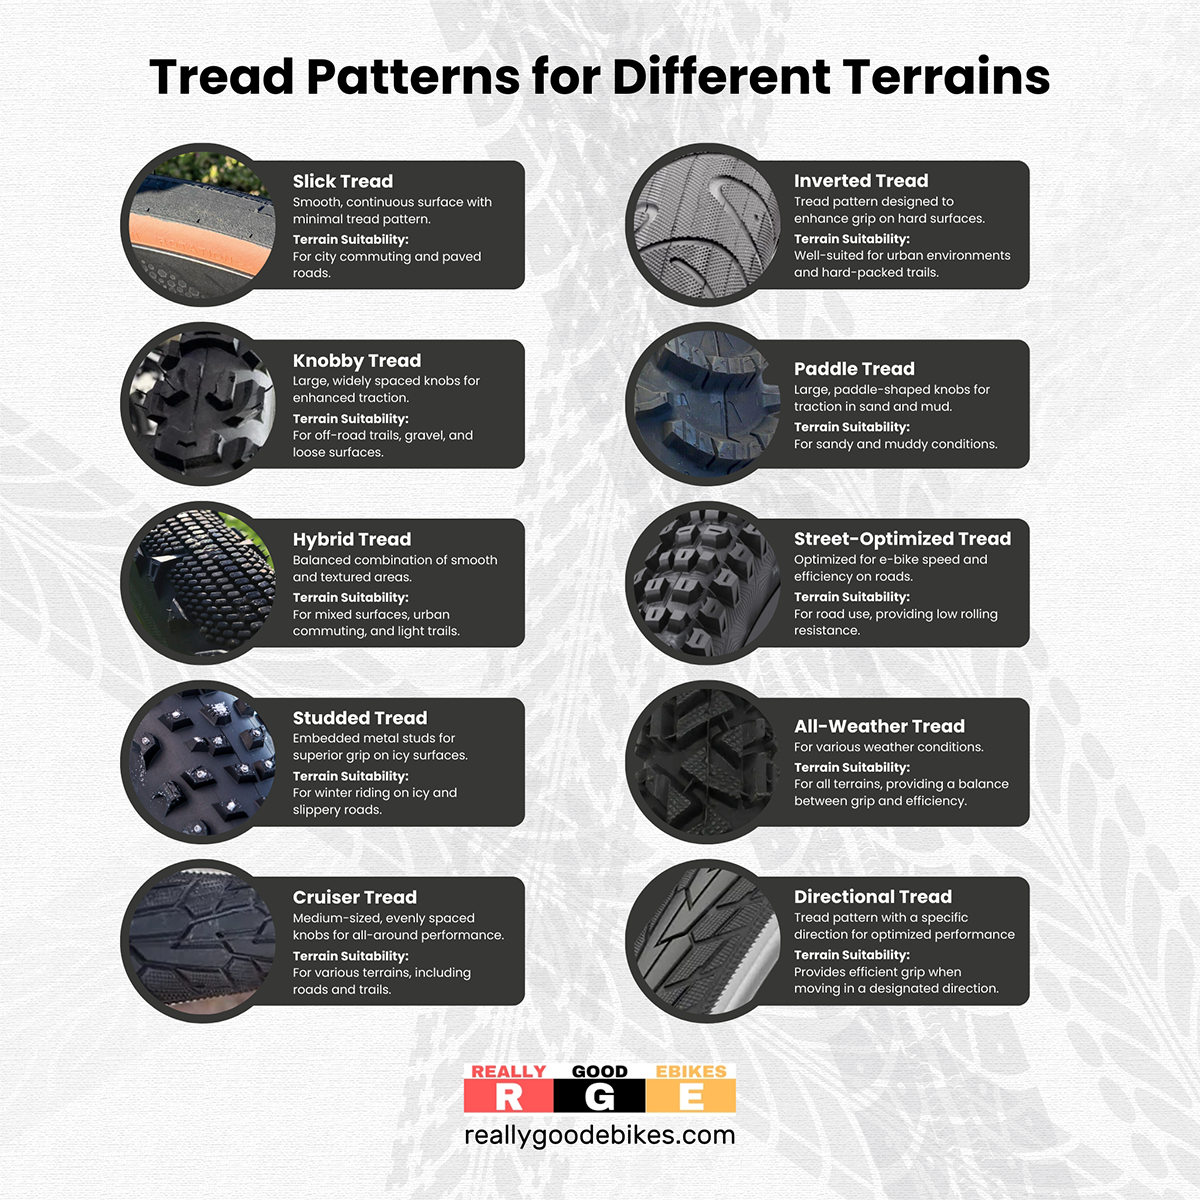 Tread Patterns for Different Terrains